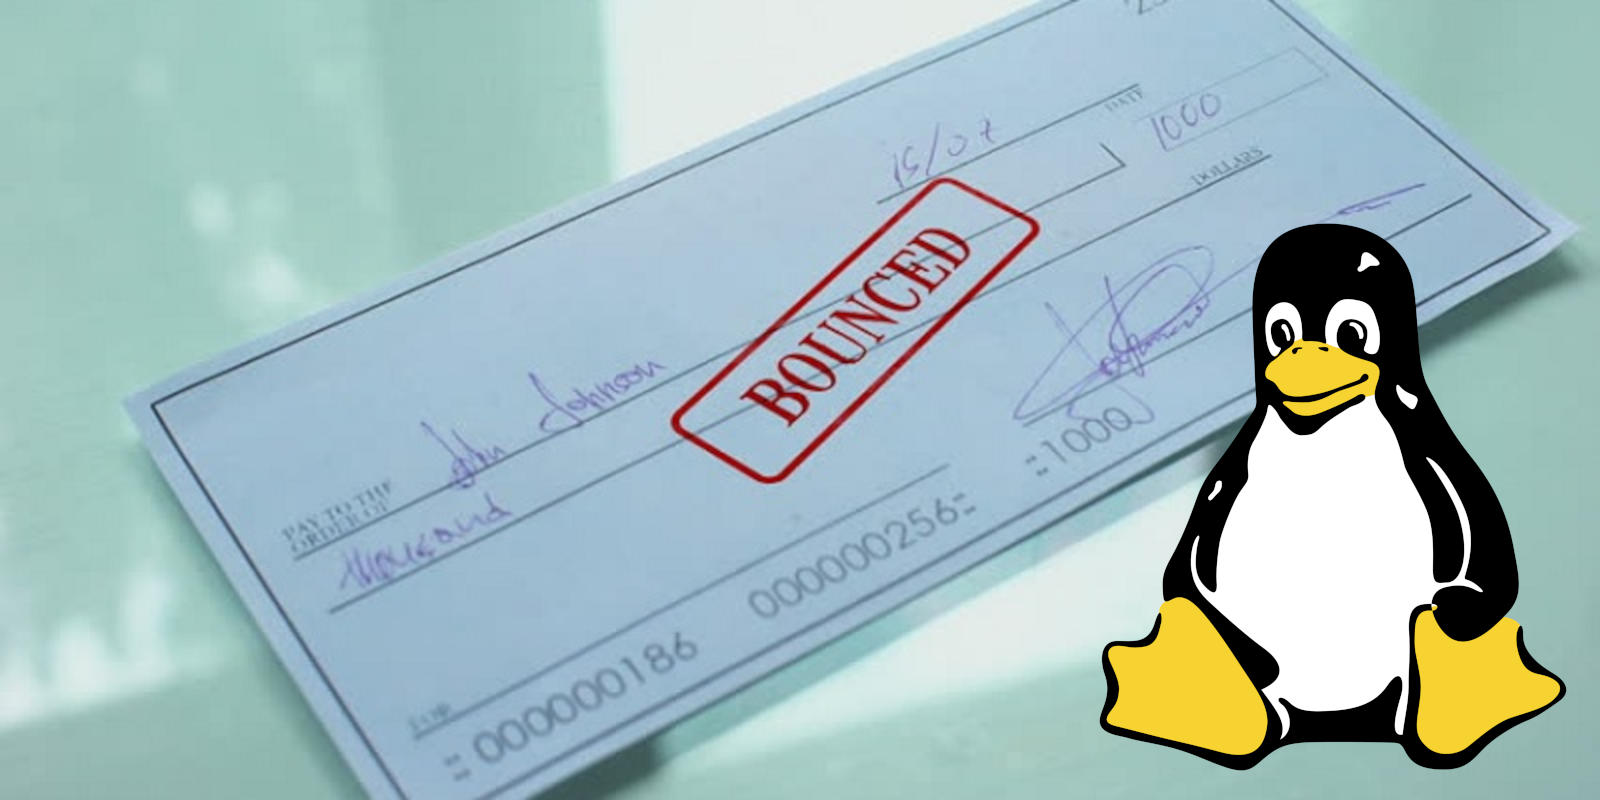 Bounced cheque, Linux foundation, conservancy, GPL, vmware